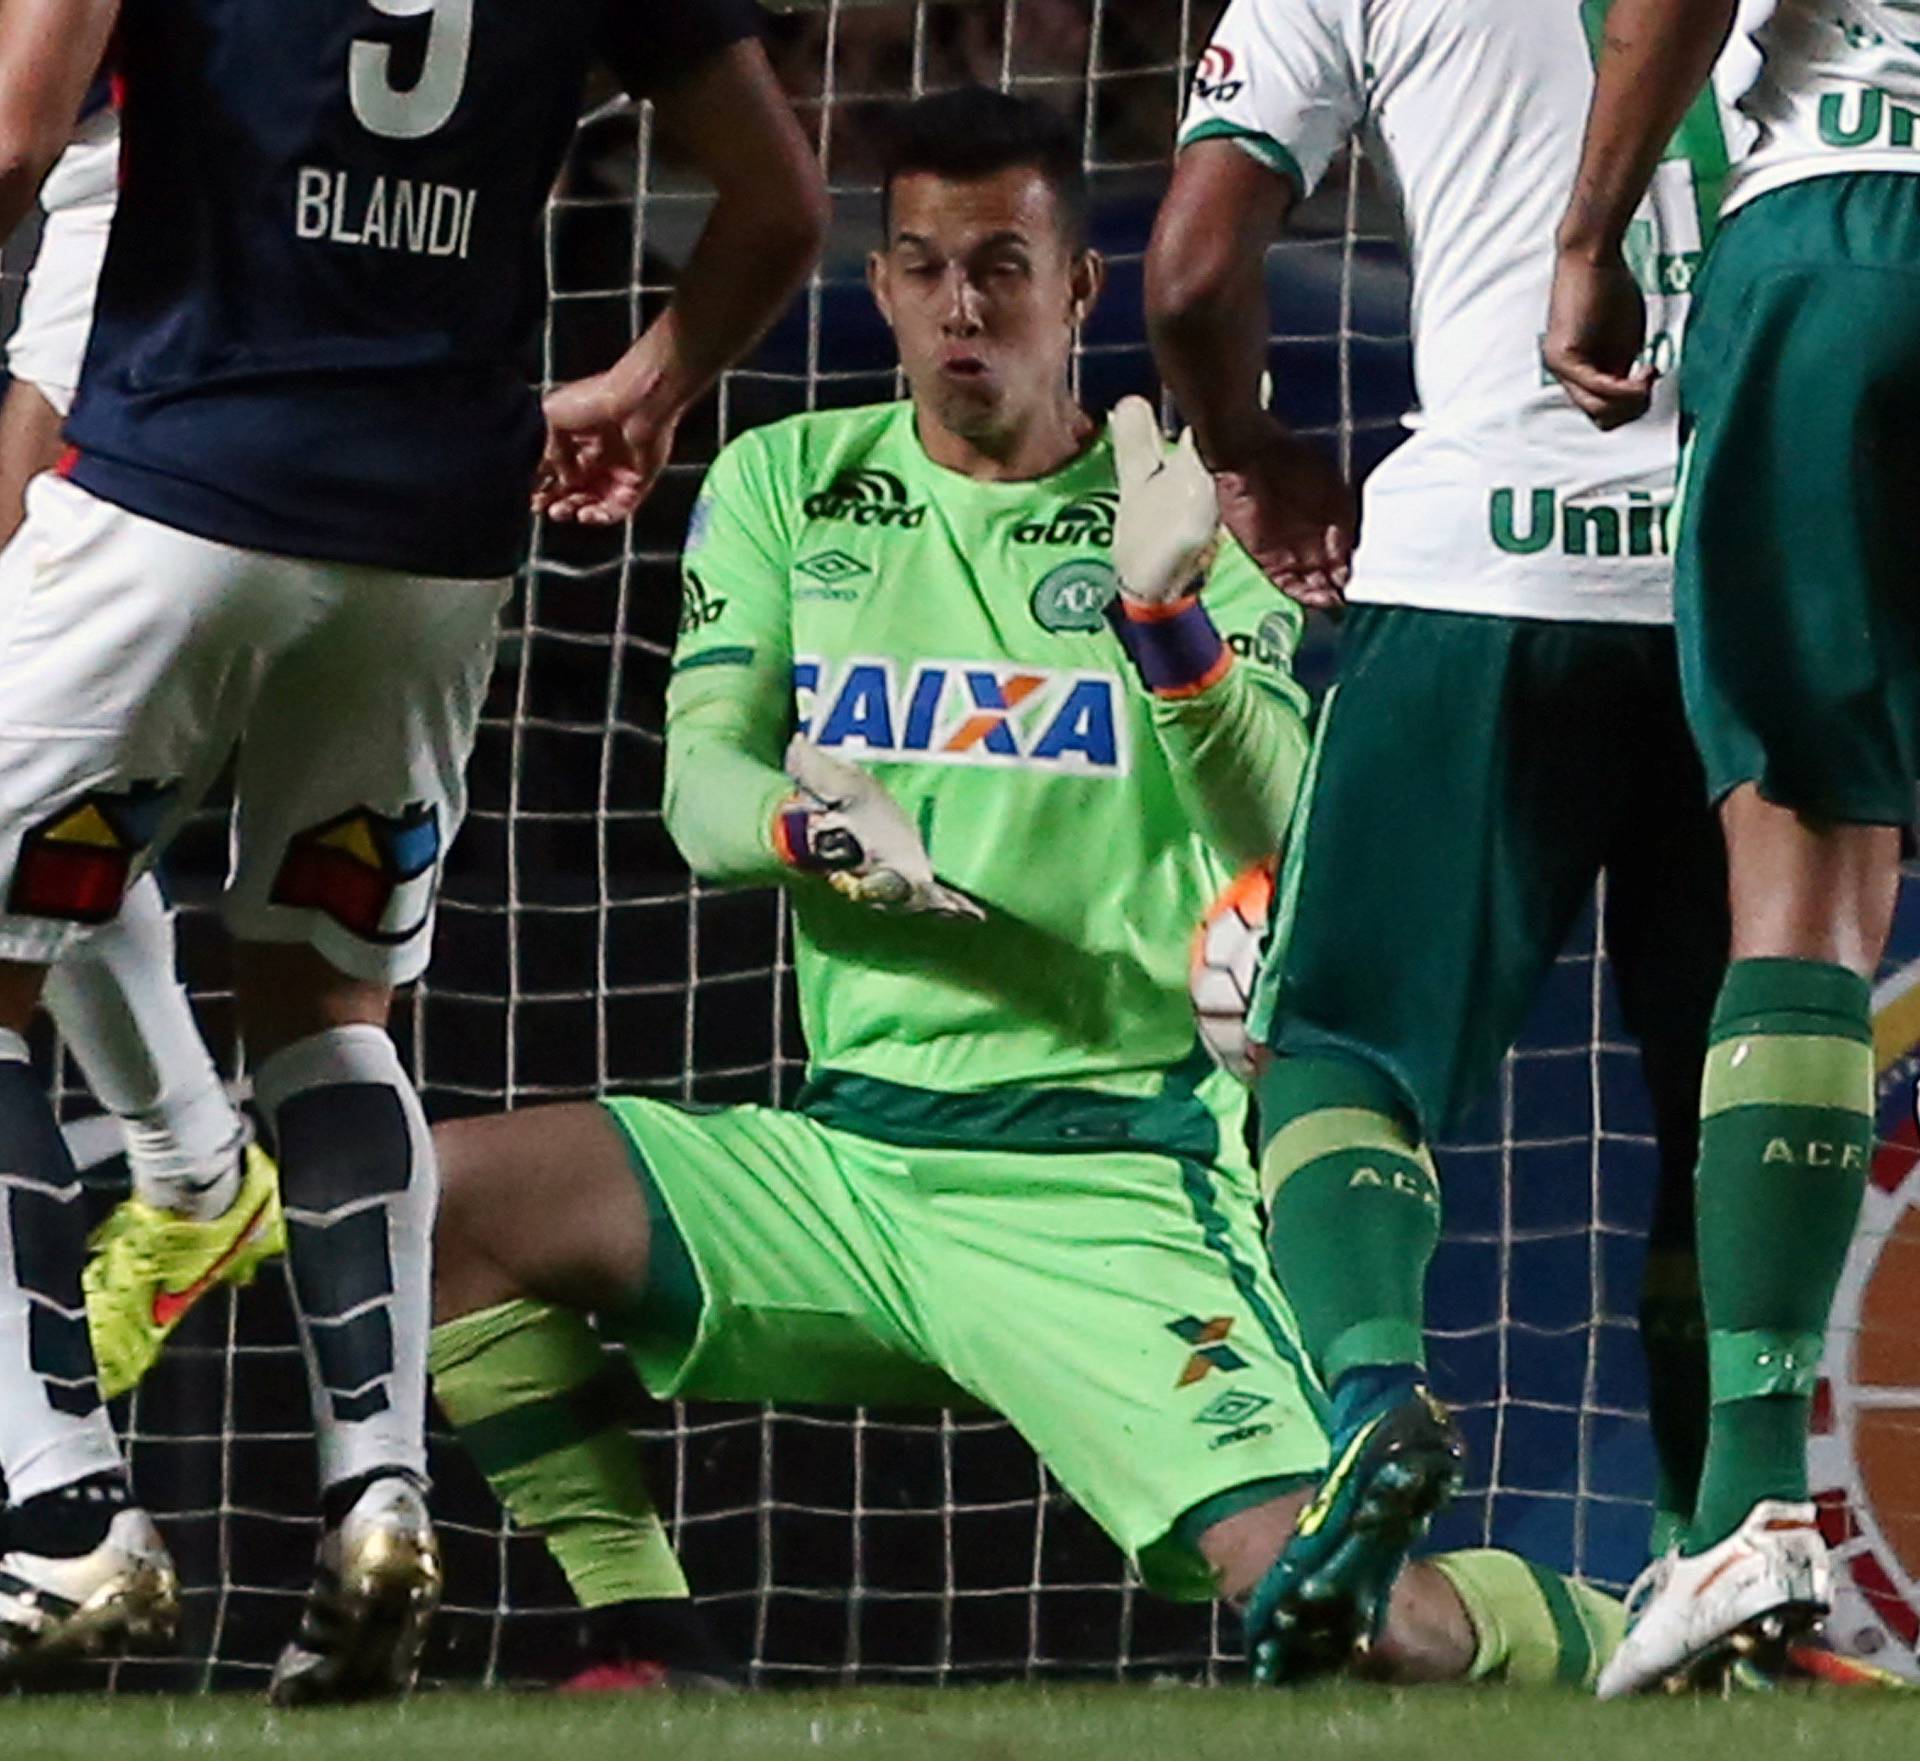 Chapecoense's goalkeeper Danilo fails to stop a goal during a match against Argentina's San Lorenzo in Buenos Aires, Argentina